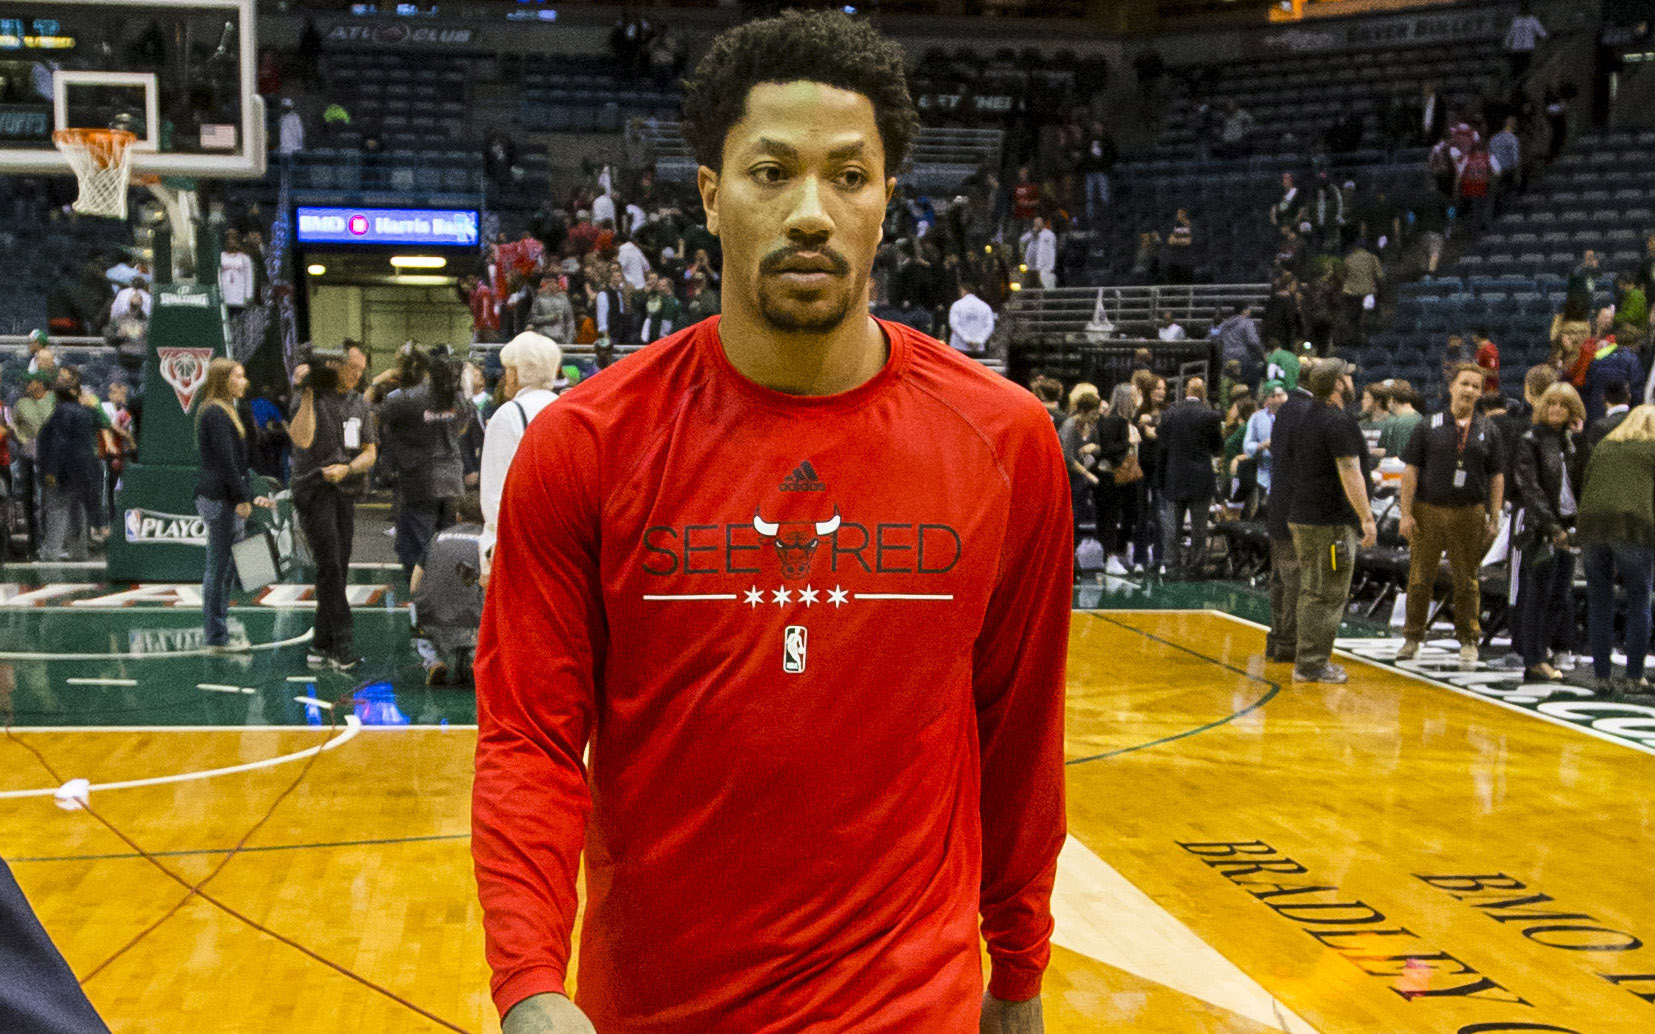 Derrick Rose reportedly offers to help pay for funeral of slain 6